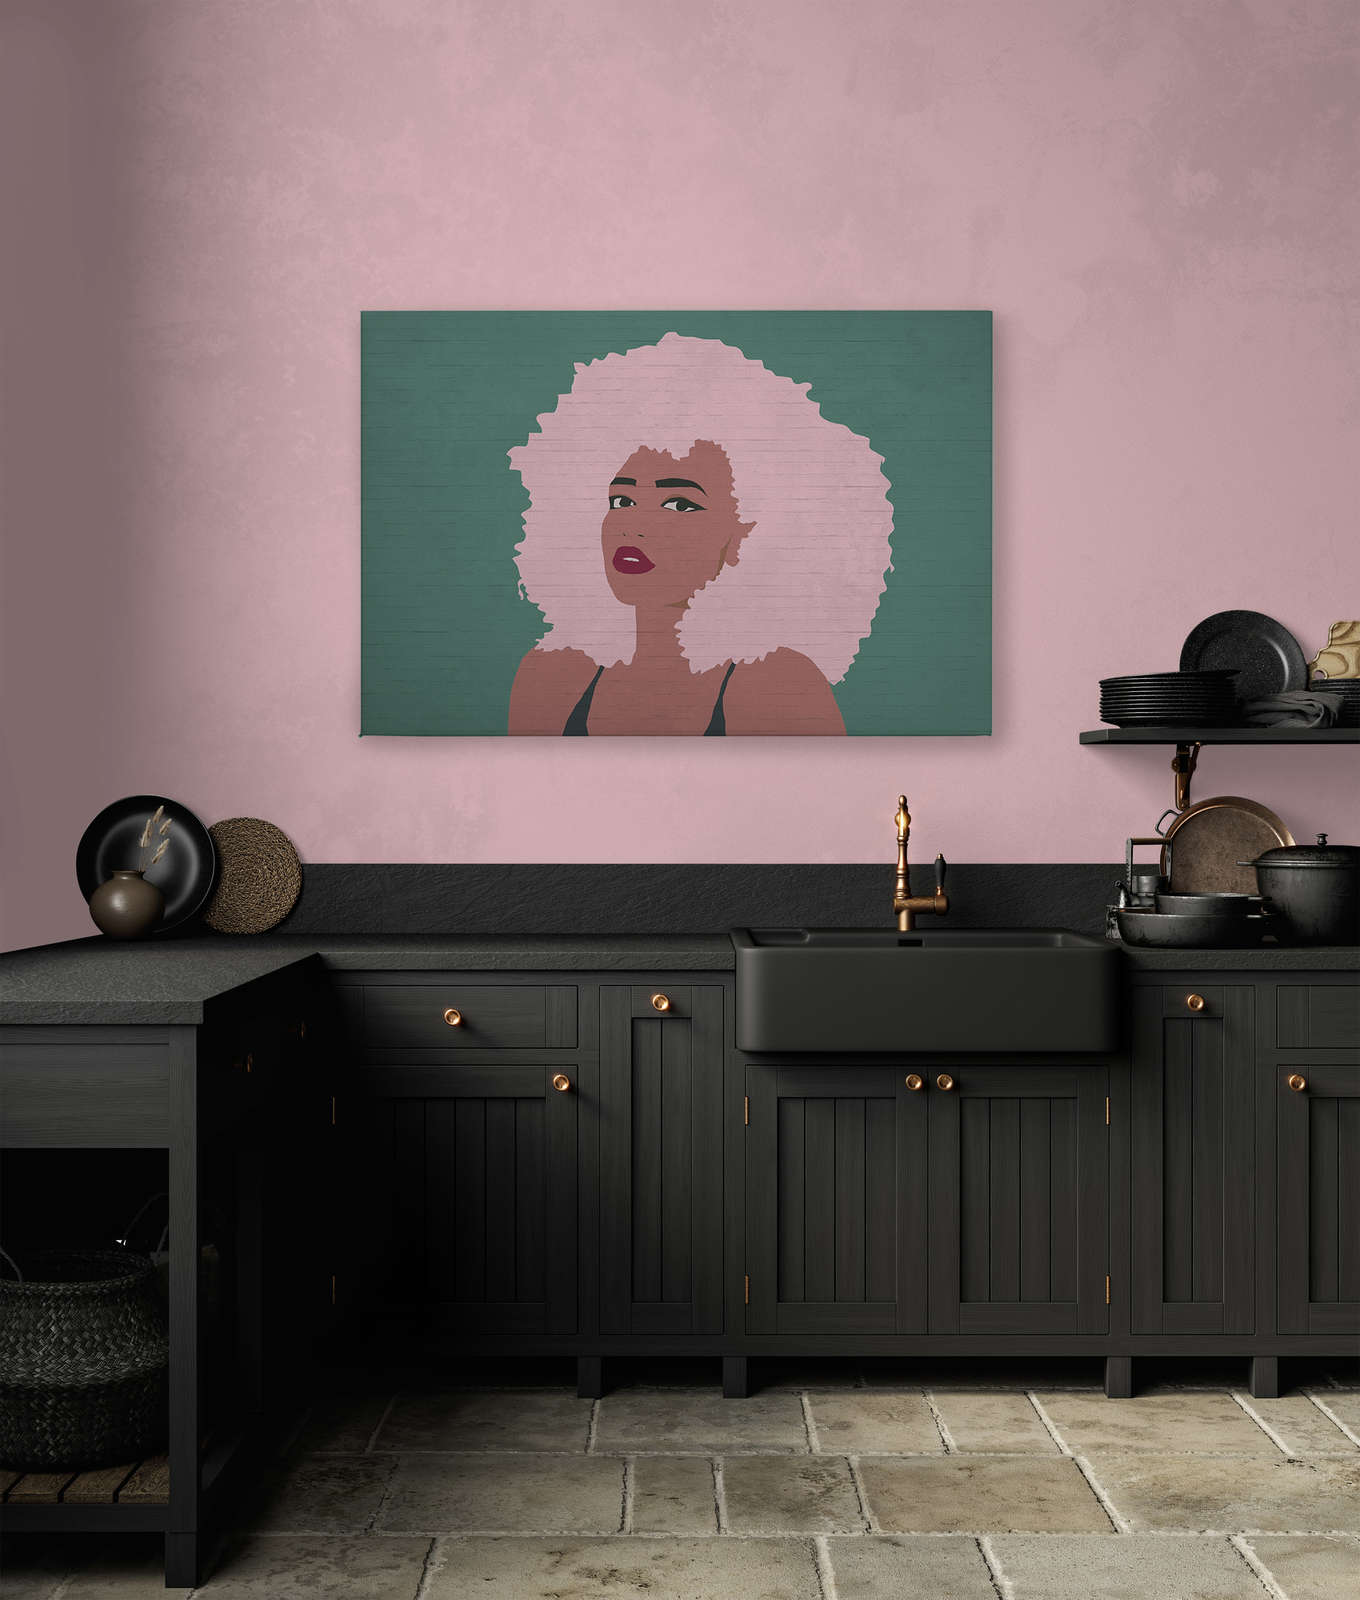             Women's Canvas Painting Whitney in Colour Block Style - 1.20 m x 0.80 m
        